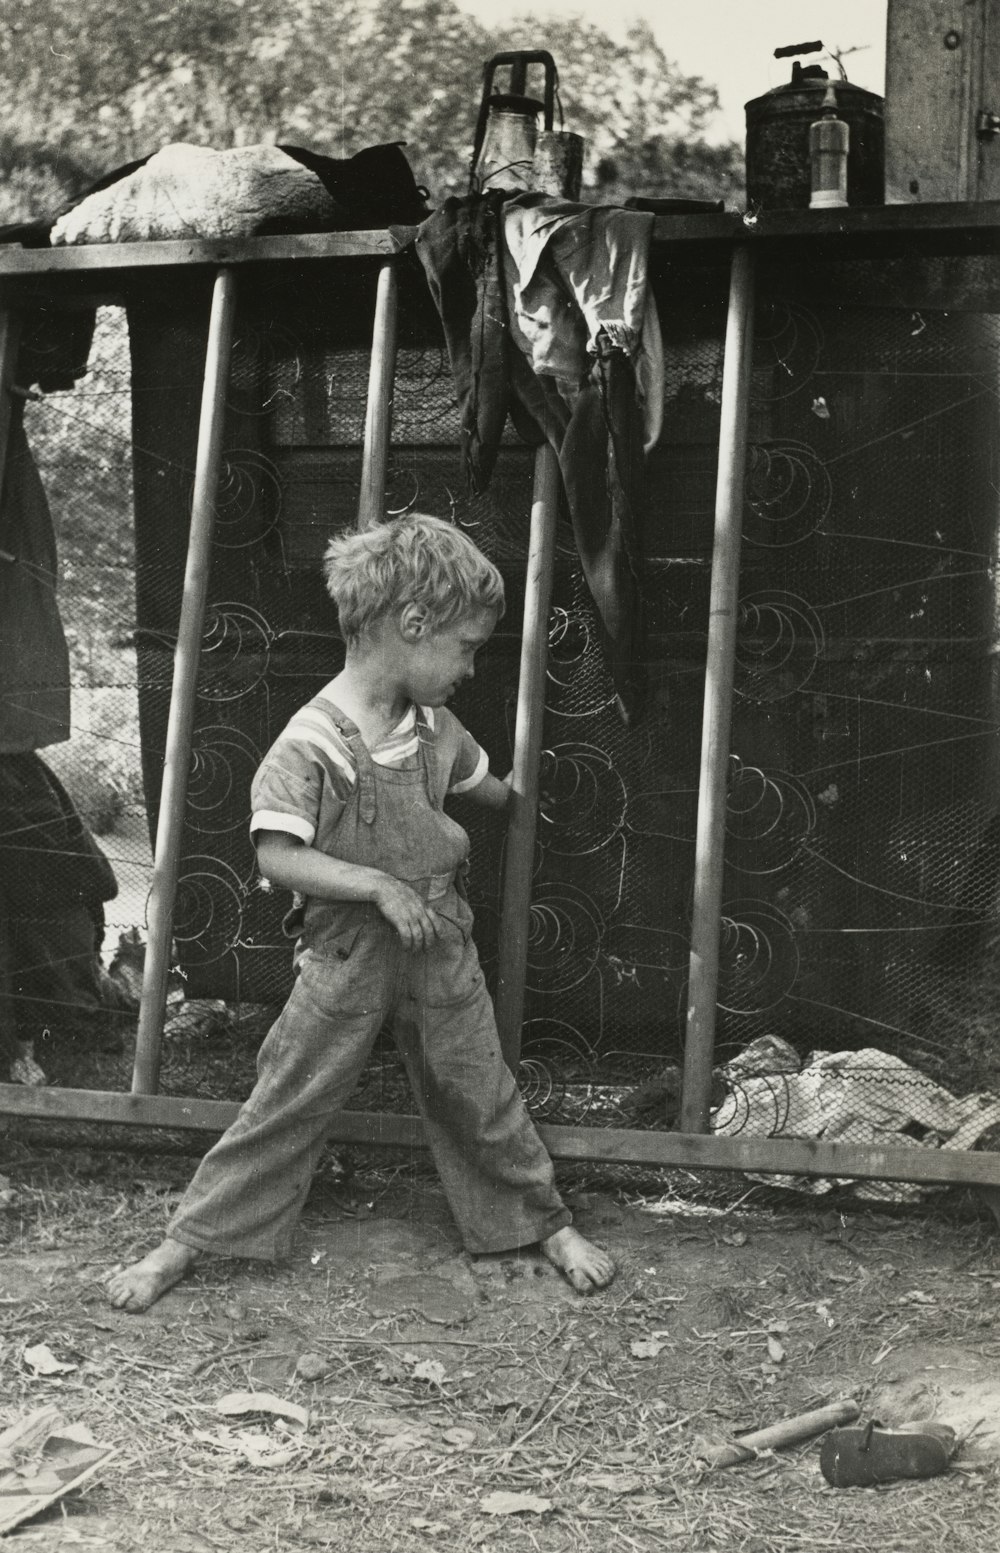 boy standing near grilles in grayscale